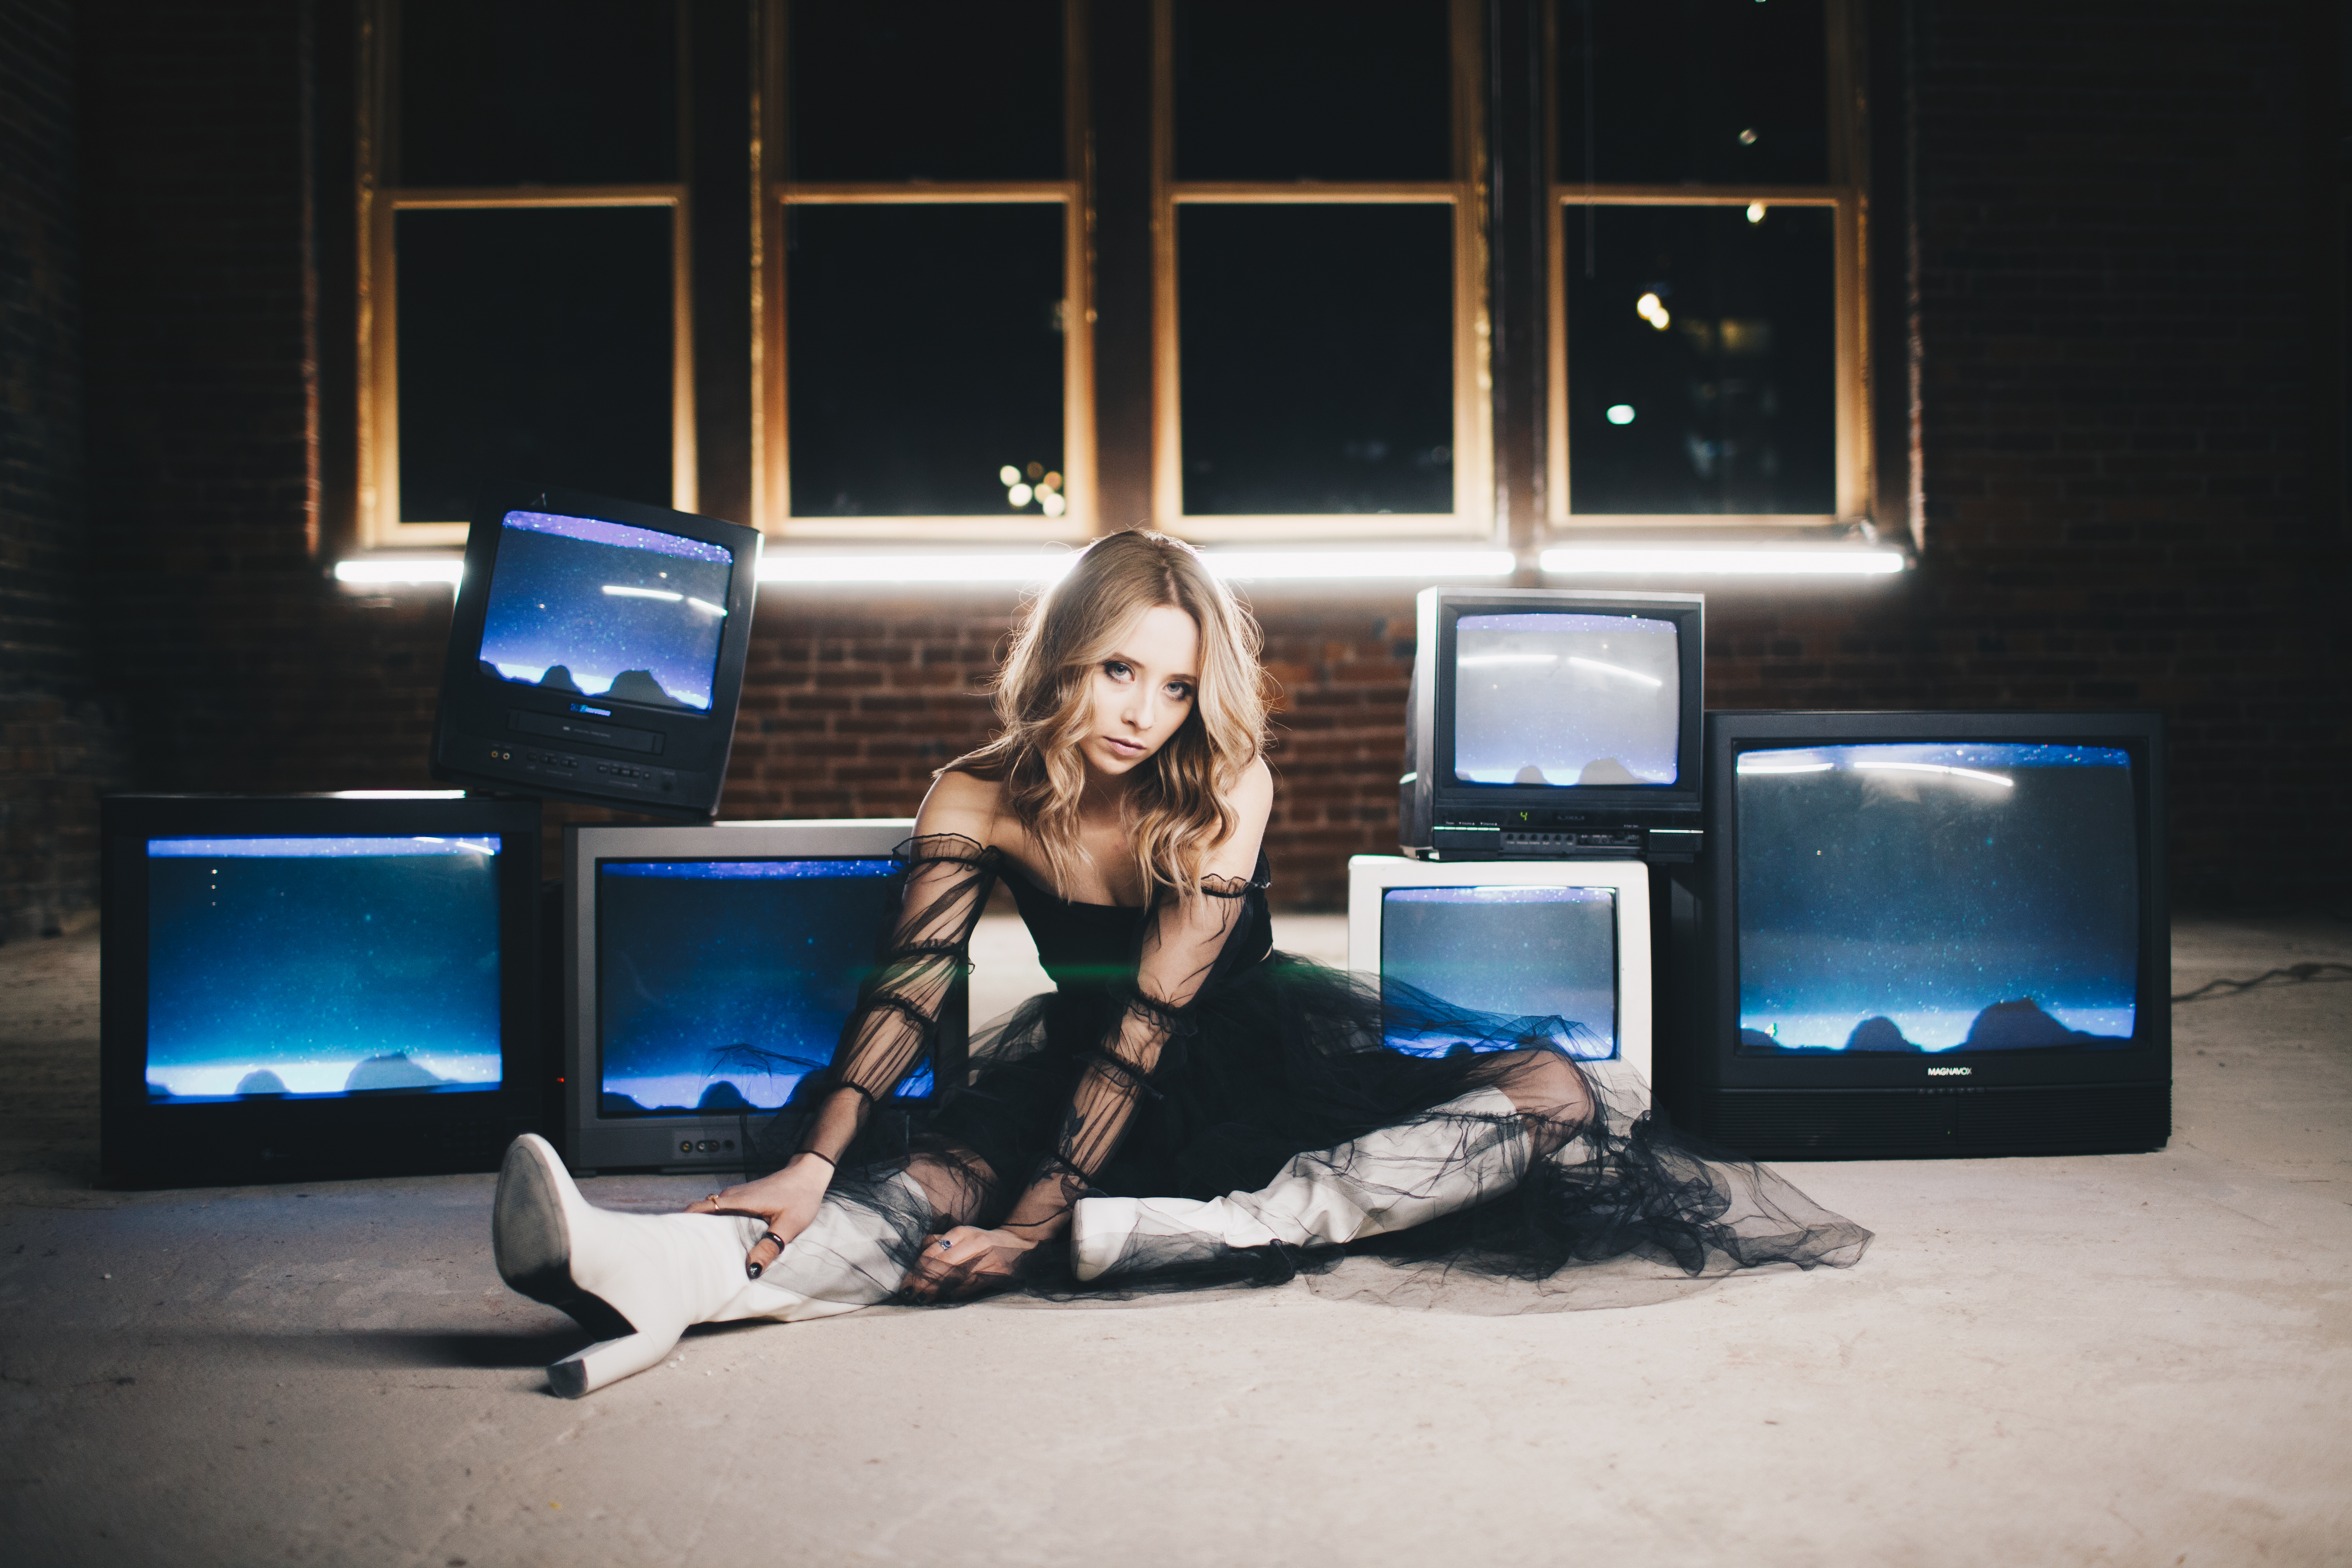 Kalie Shorr Is Making The Most of Having Two Versions of Her Single ‘Awake’